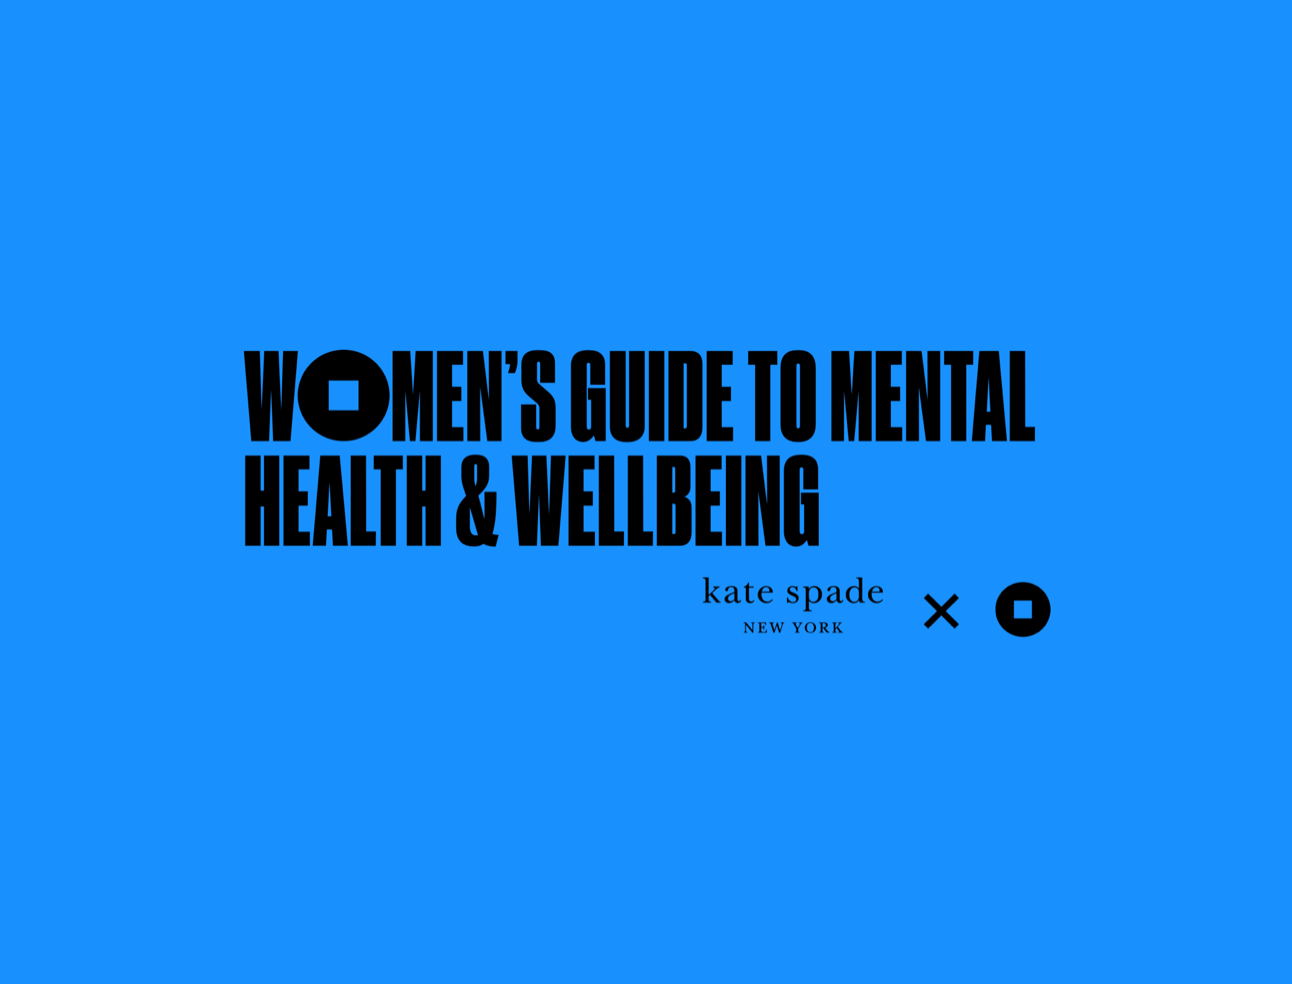 The Coalition & Kate Spade New York's Guide to Women's Mental Health &  Wellbeing - The Mental Health Coalition